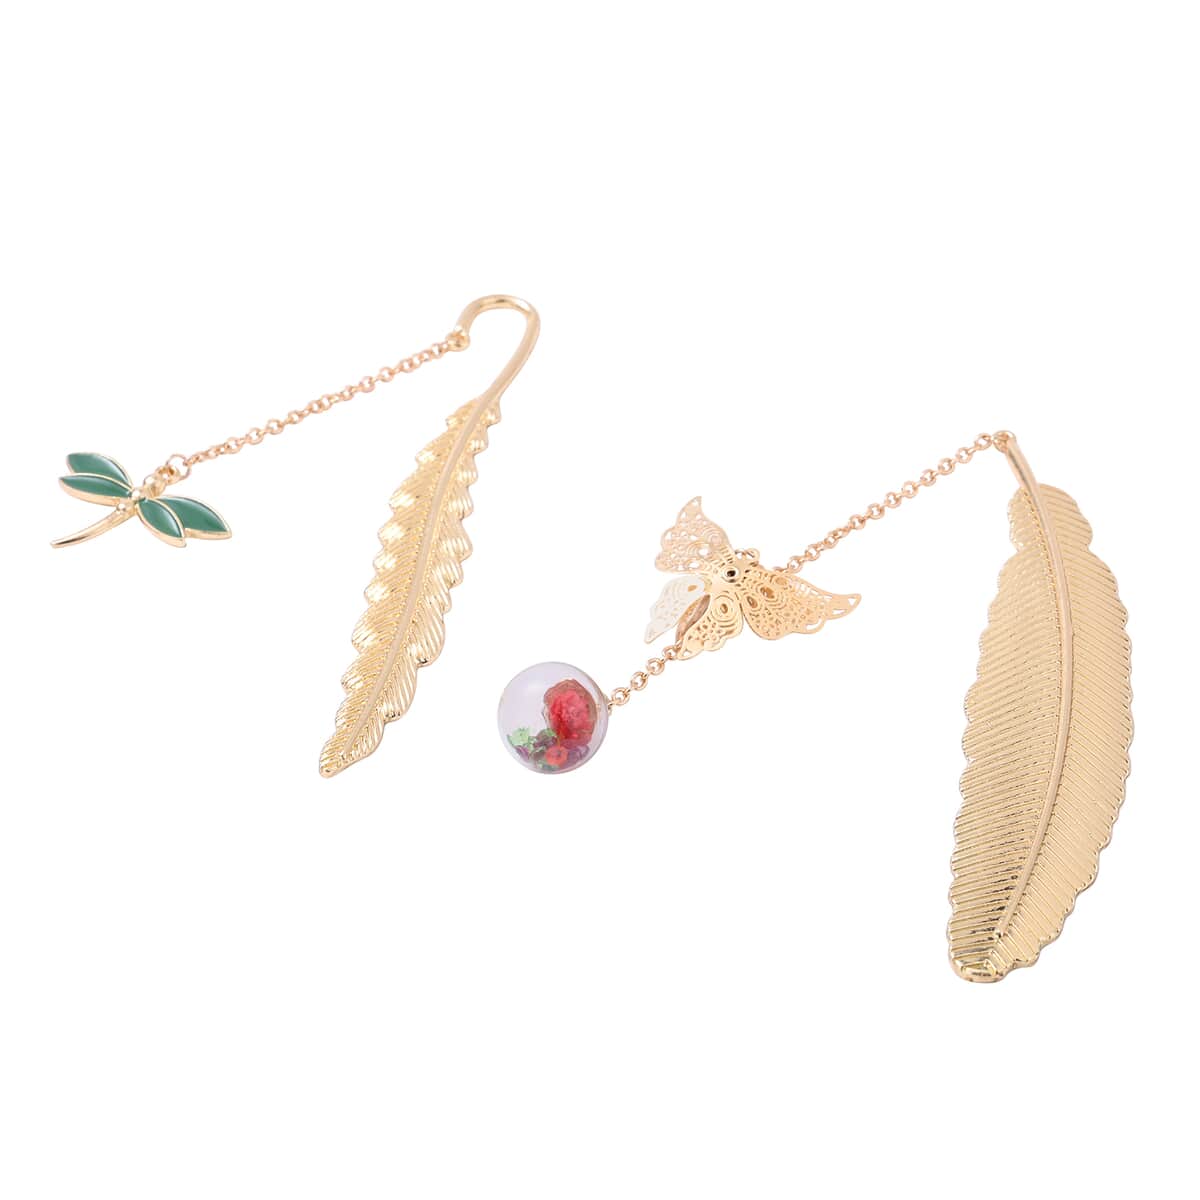 Set of 2 Multi Austrian Crystal and Enameled Metallic Feather Bookmarks in Goldtone with Dragonfly Charm, Butterfly and Dried Pressed Flower image number 2